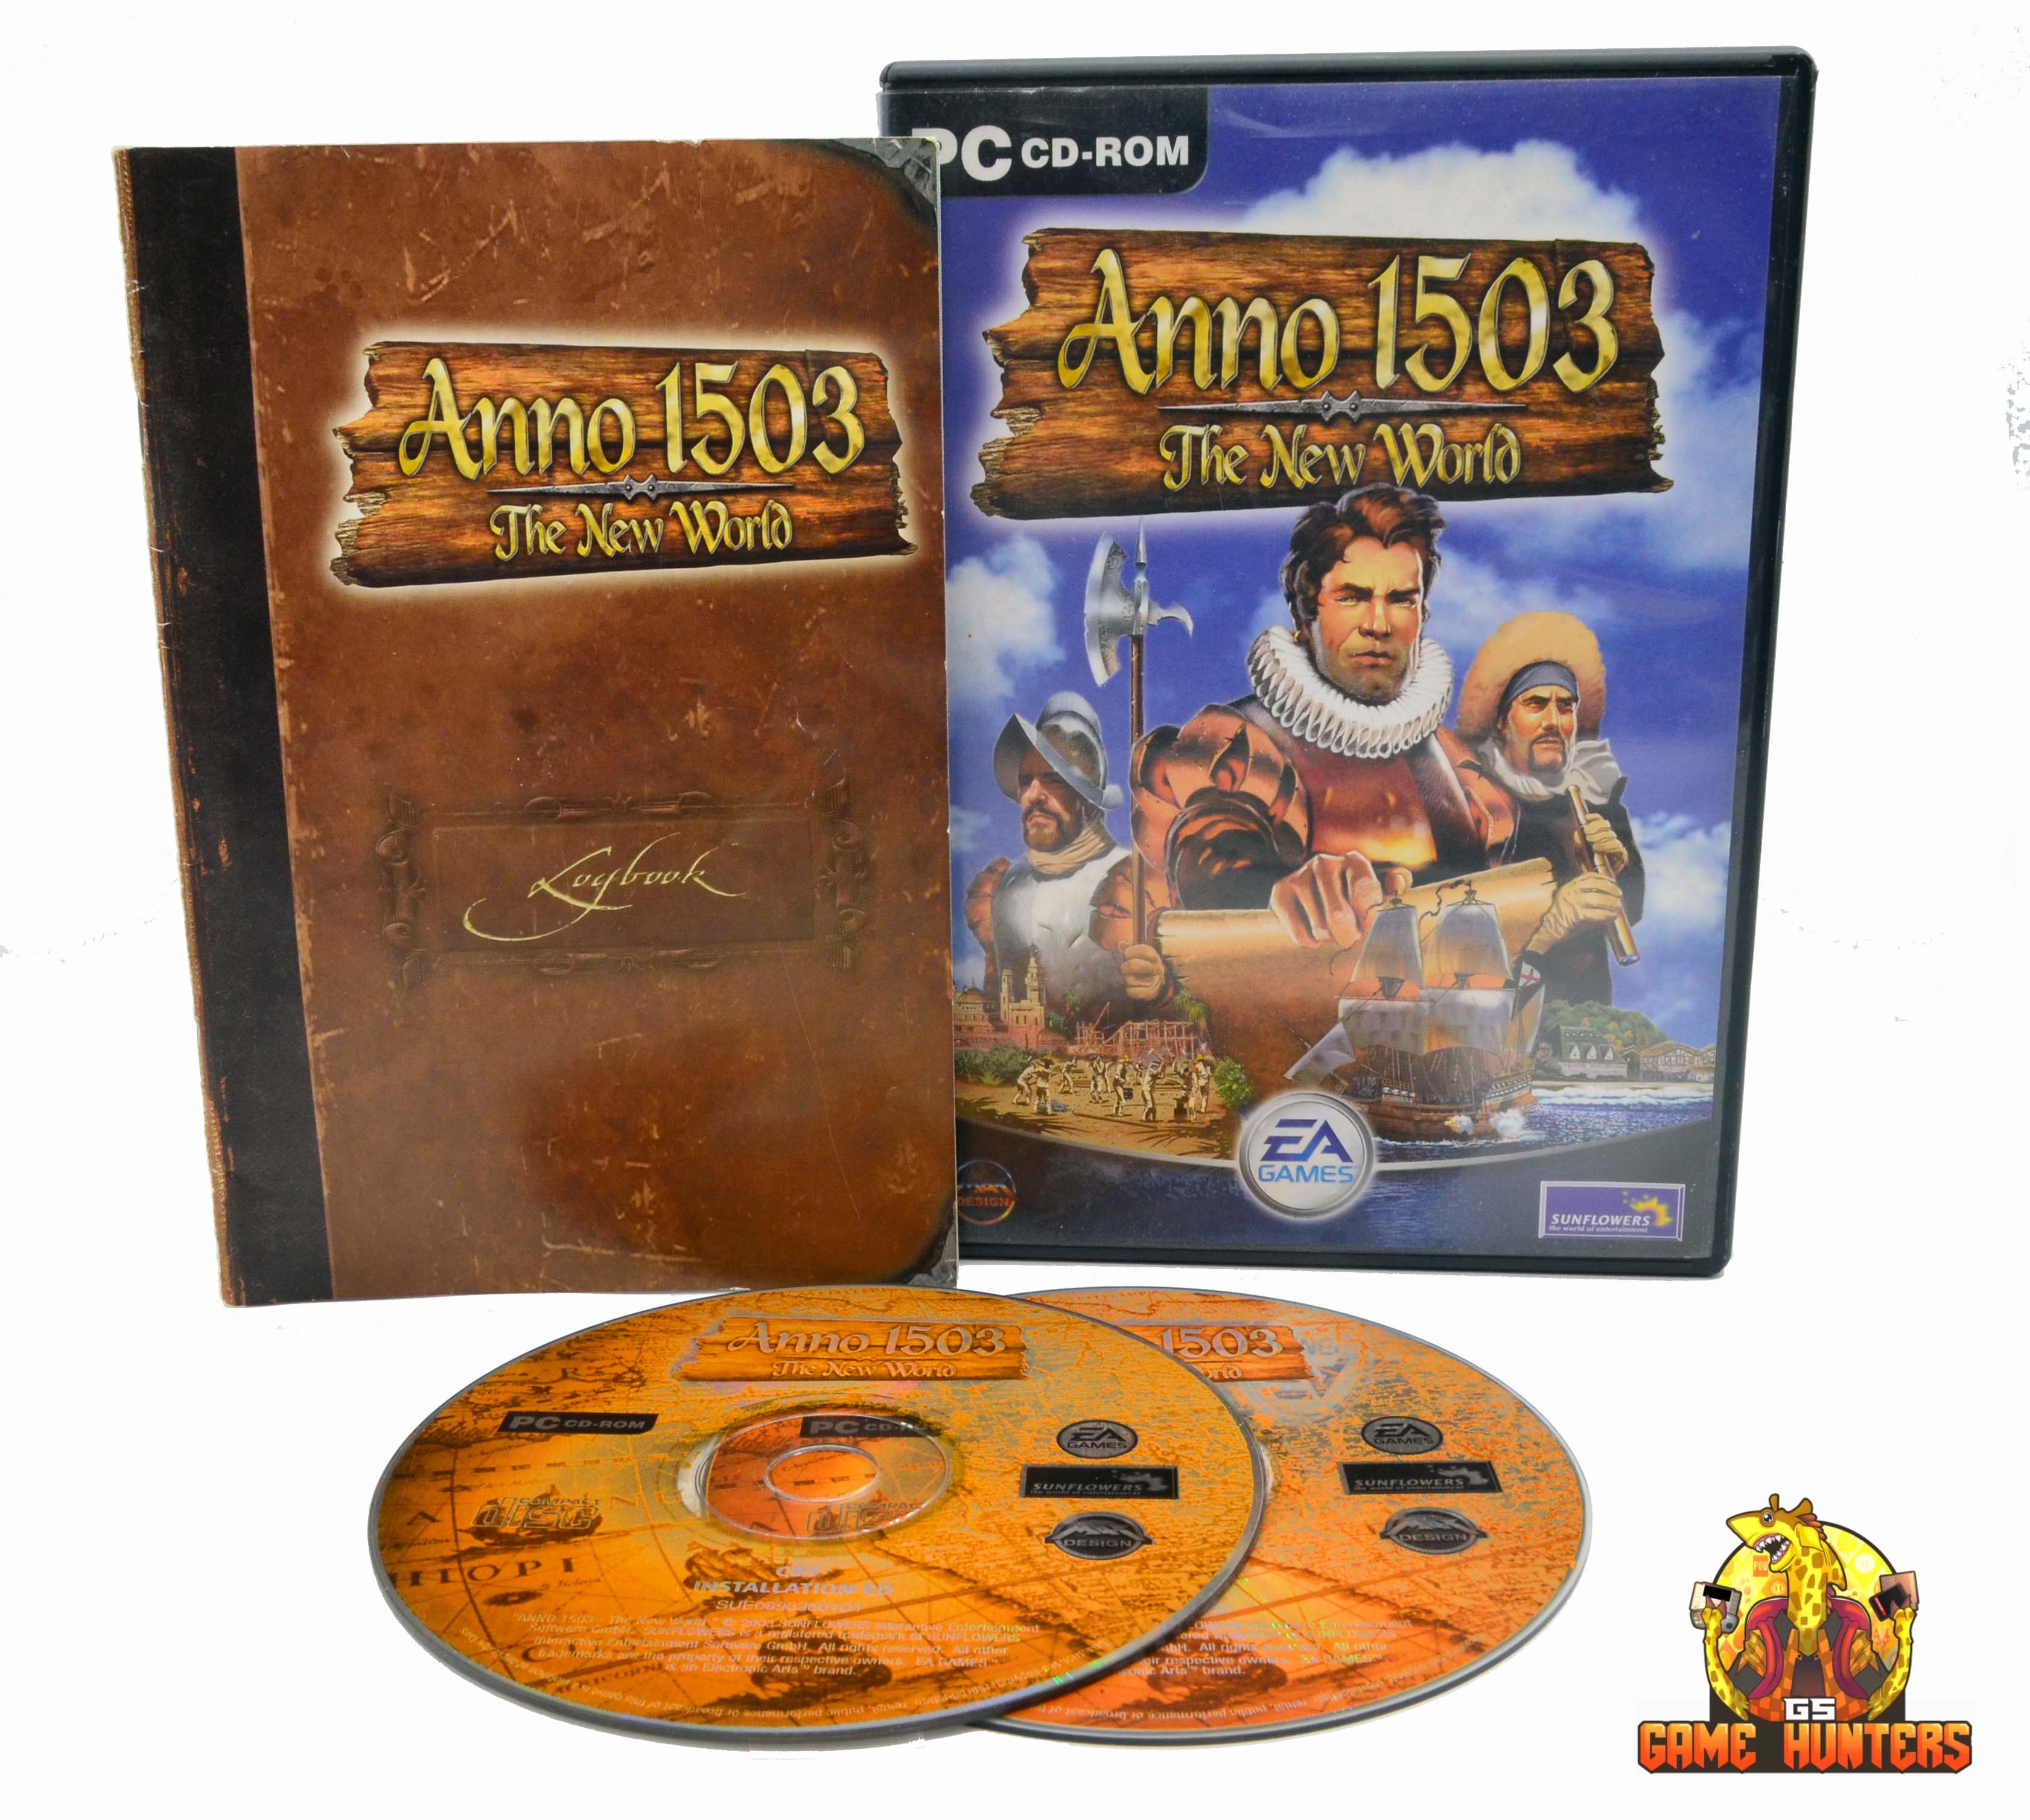 Anno 1503 The New World Case, Manual & Discs.jpg  by GSGAMEHUNTERS